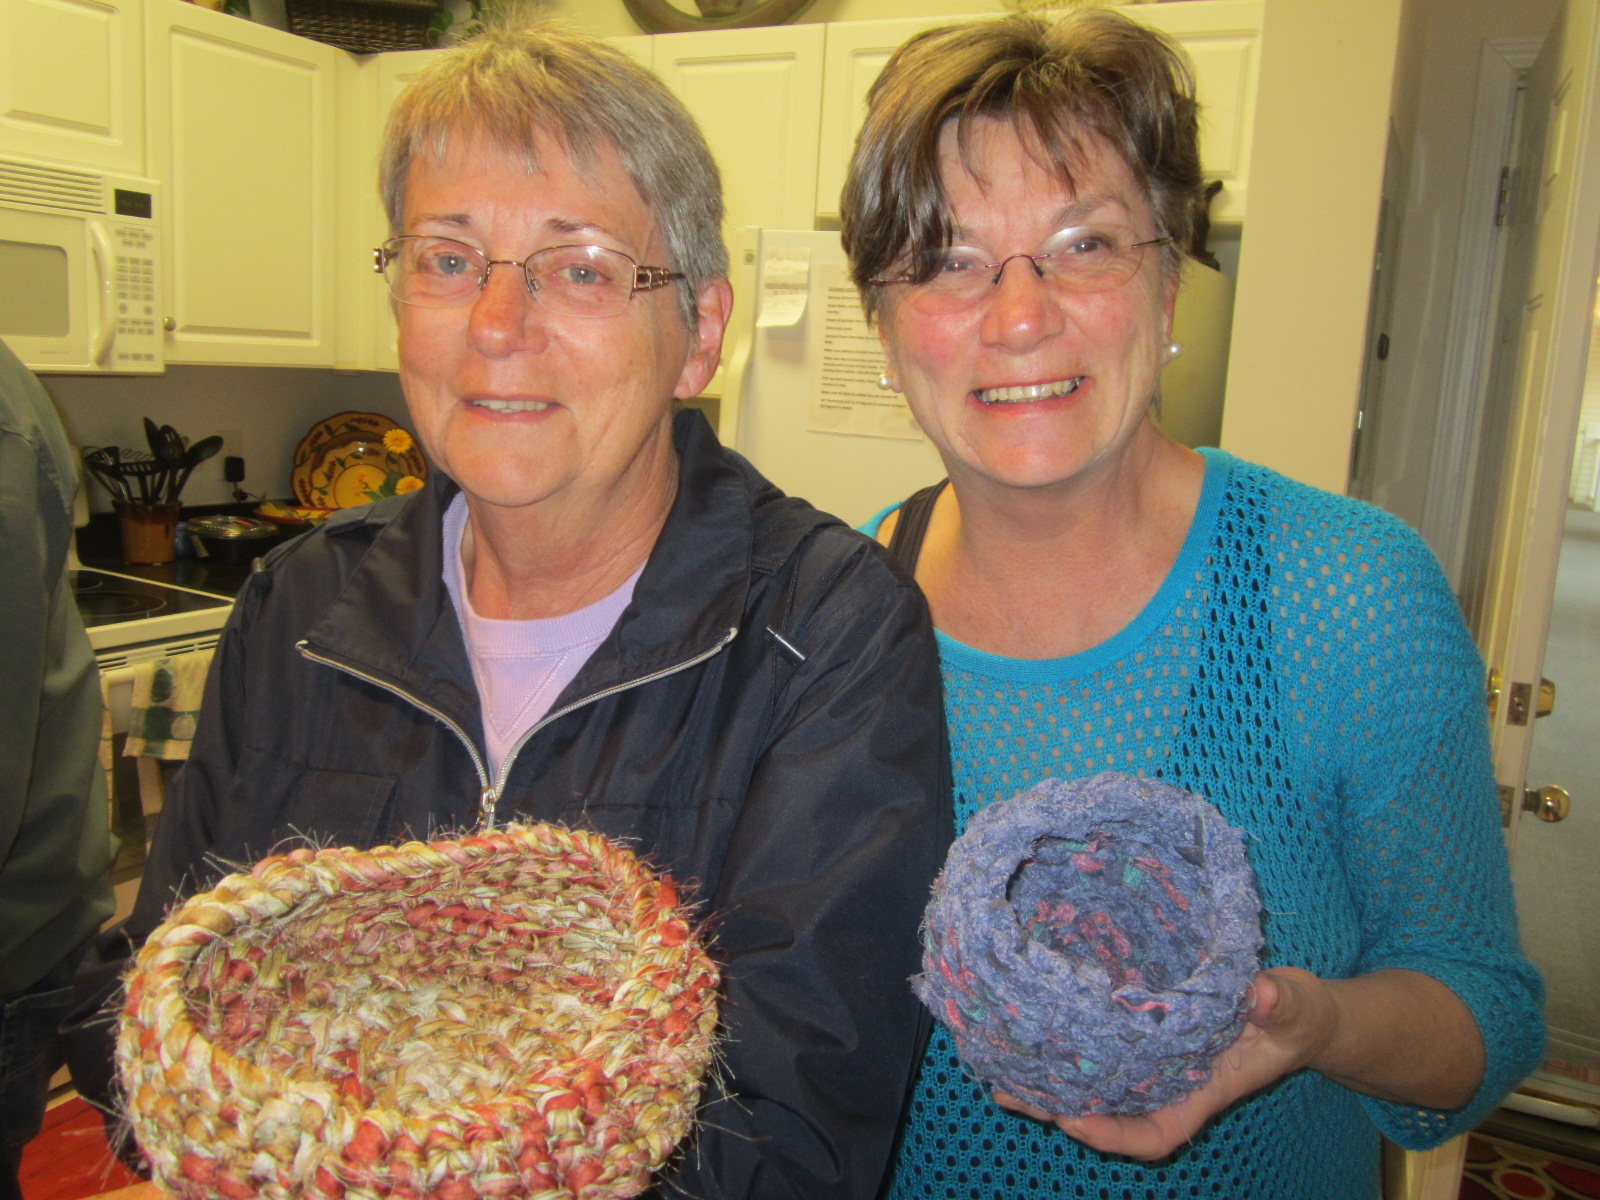 Juliene and Mom show their crocheted baskets